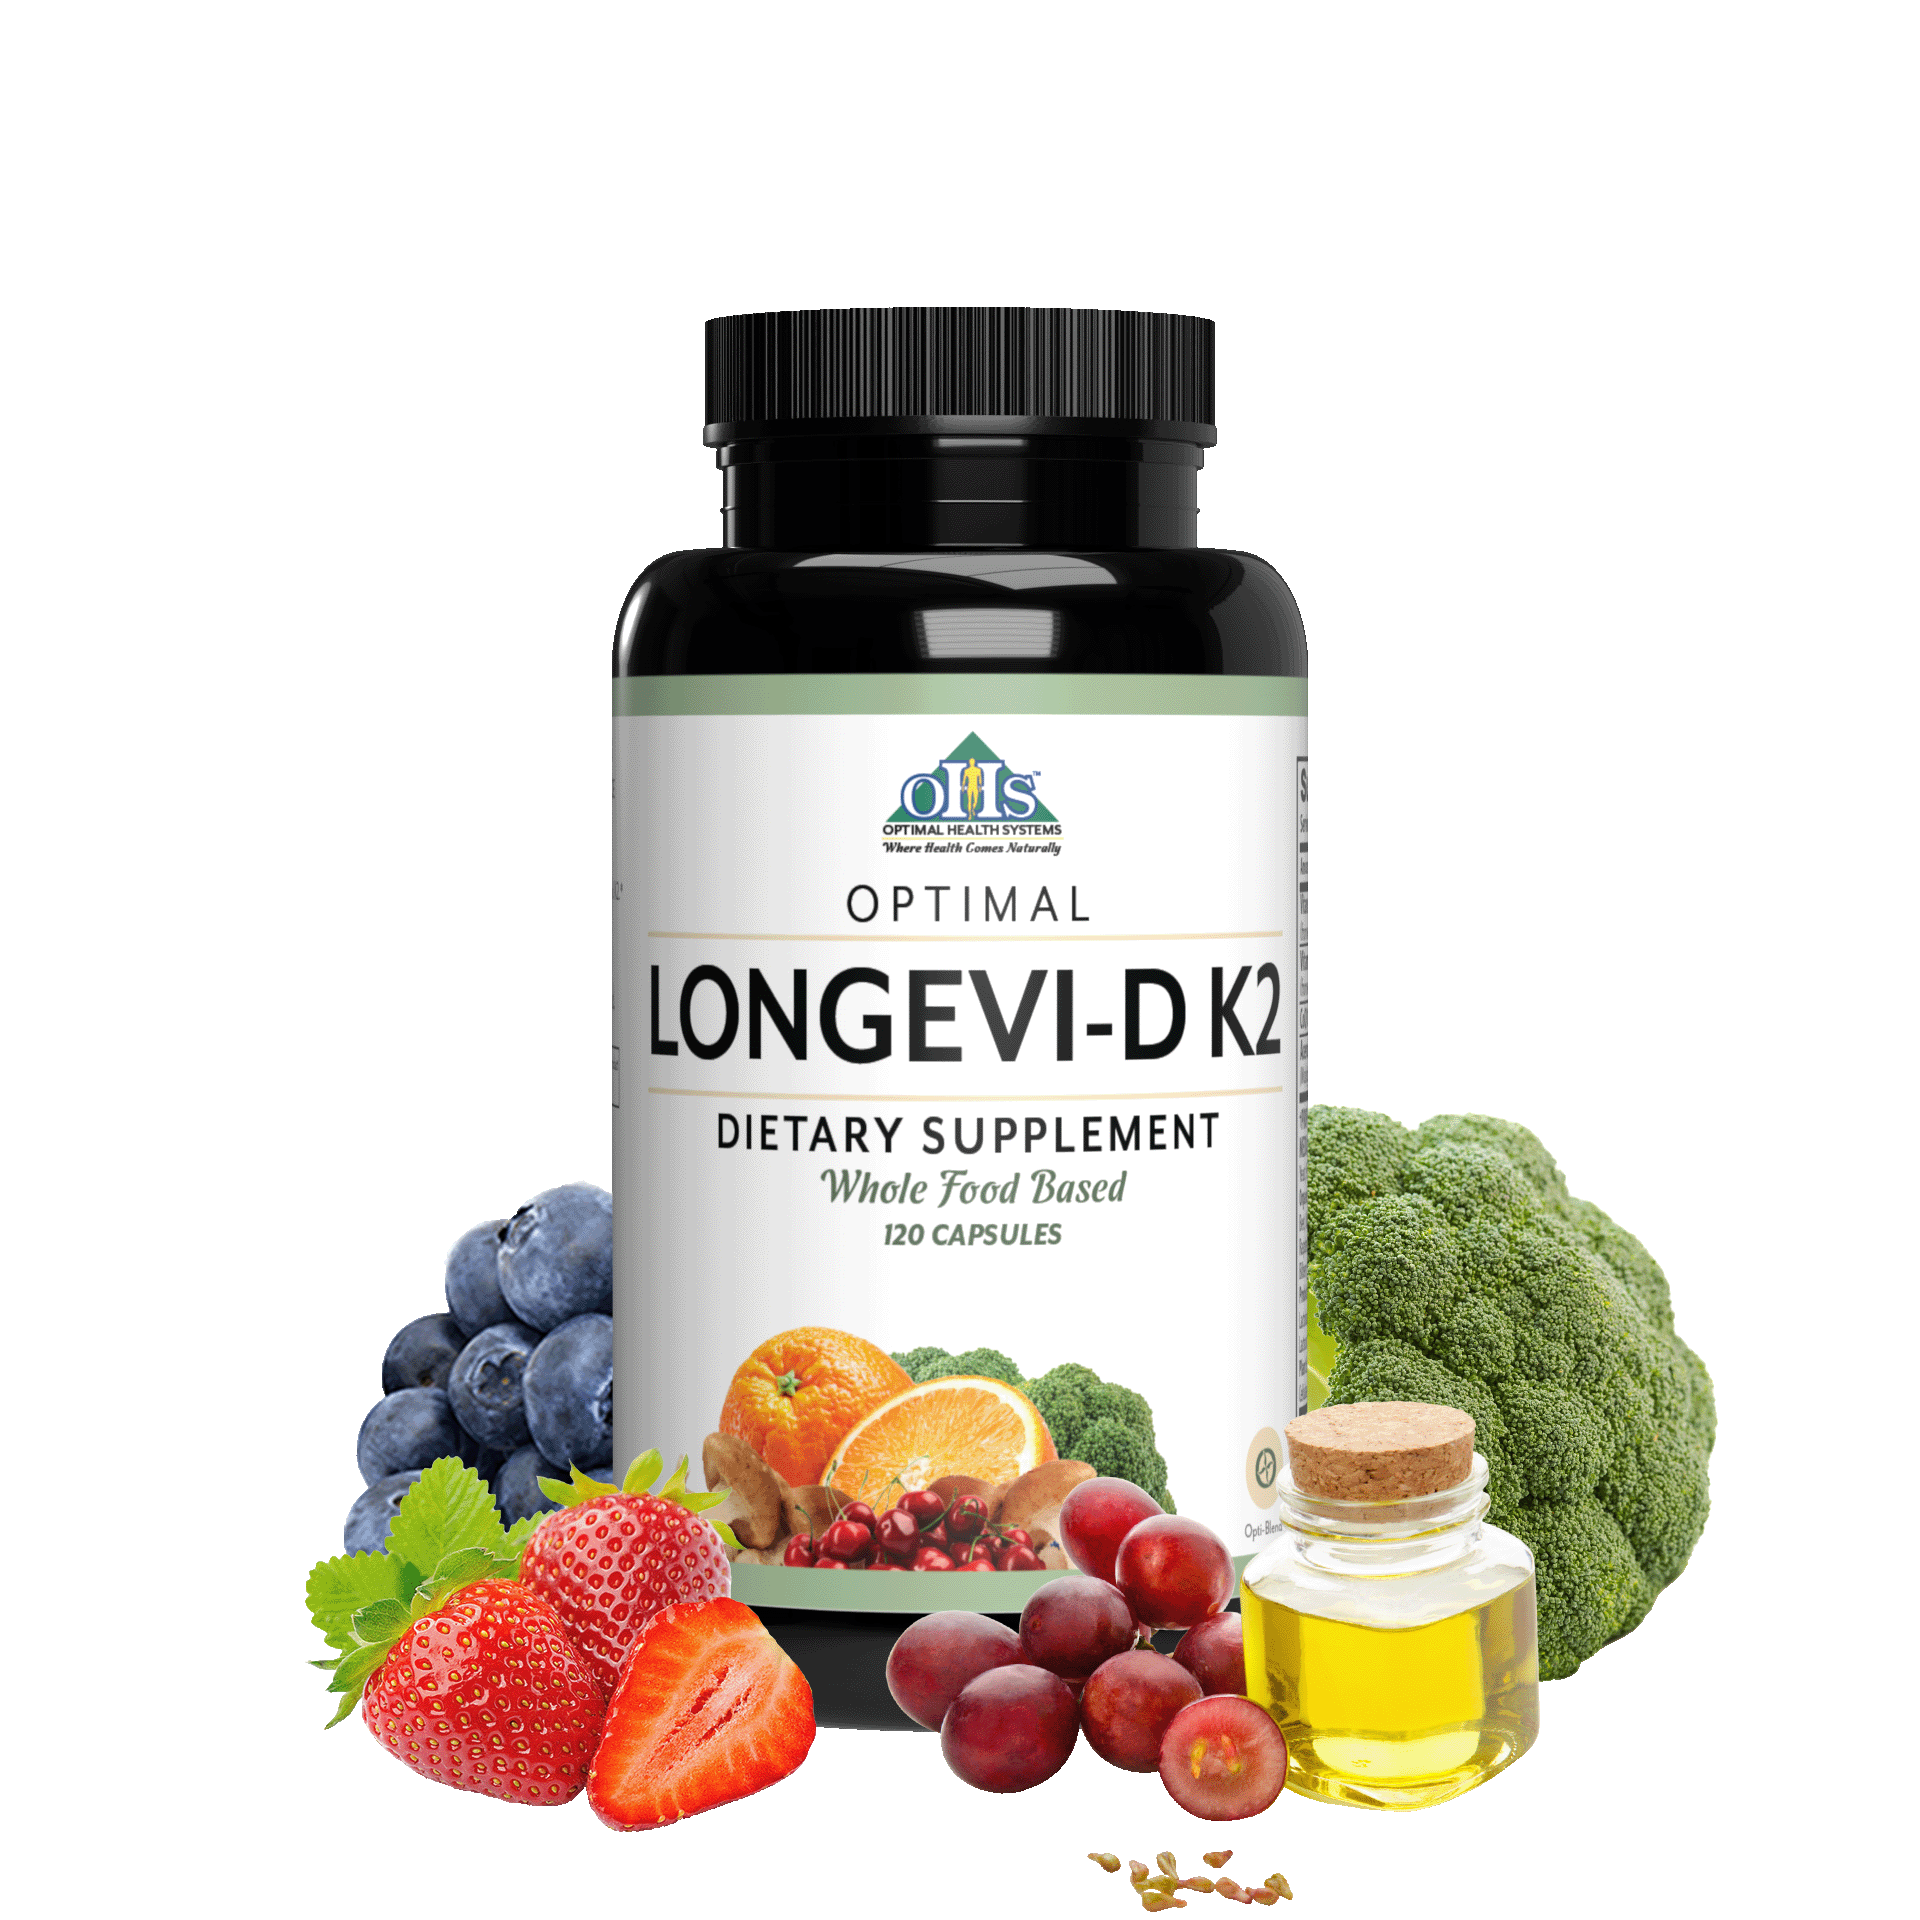 Image of a bottle of Optimal Longevi-D K2 with blueberries, strawberries, broccoli, and red grapes with seeds and a bottle of grape seed oil.